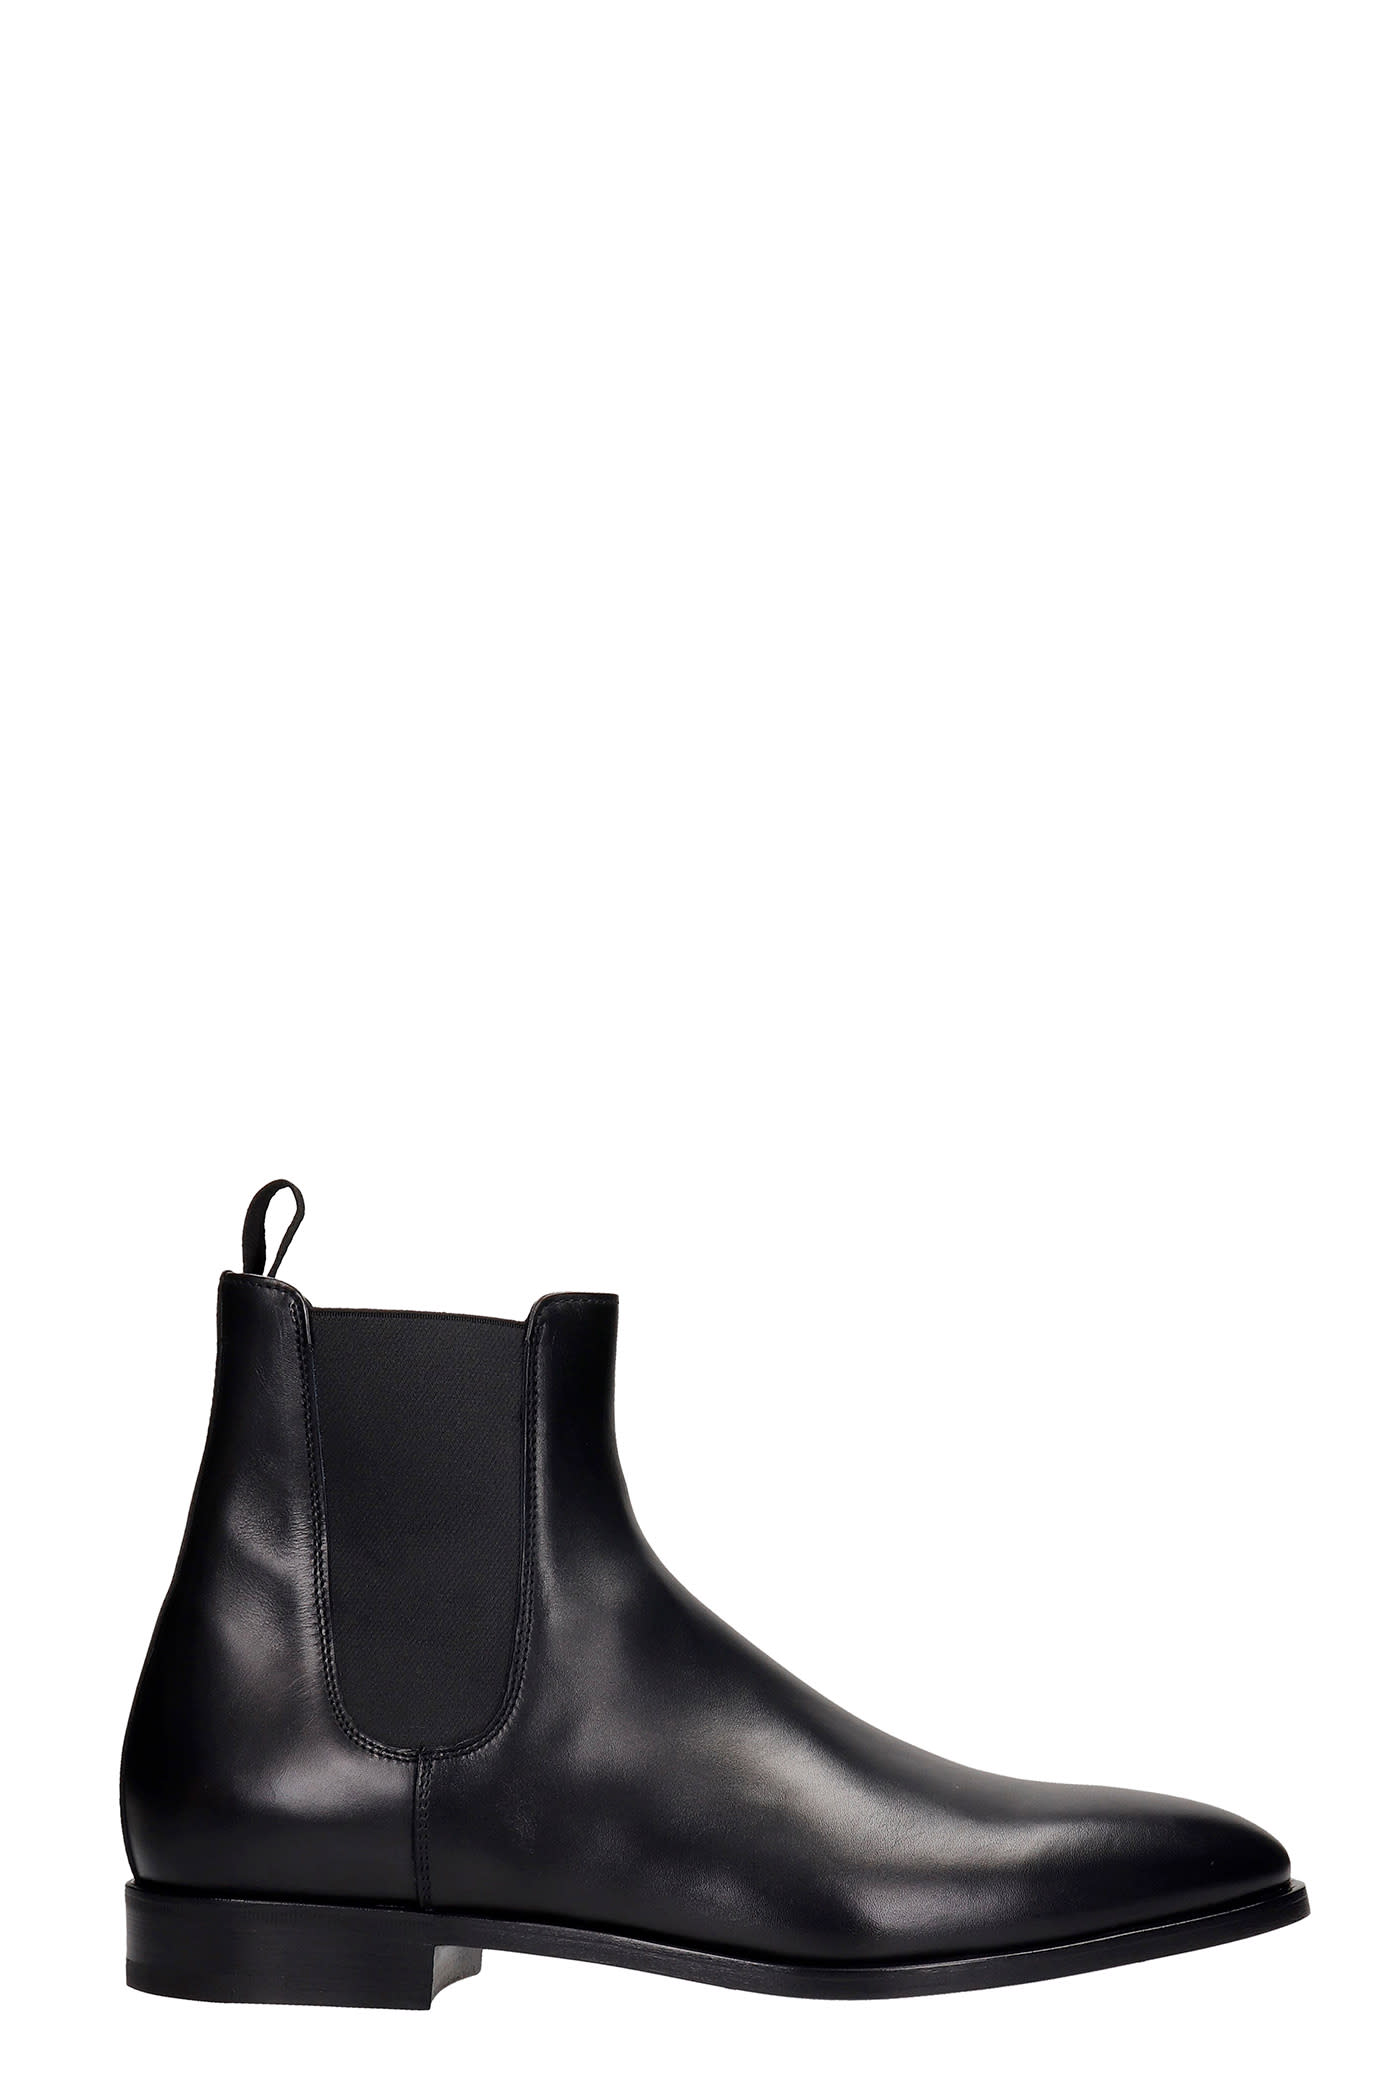 Premiata Low Heels Ankle Boots In Black Leather